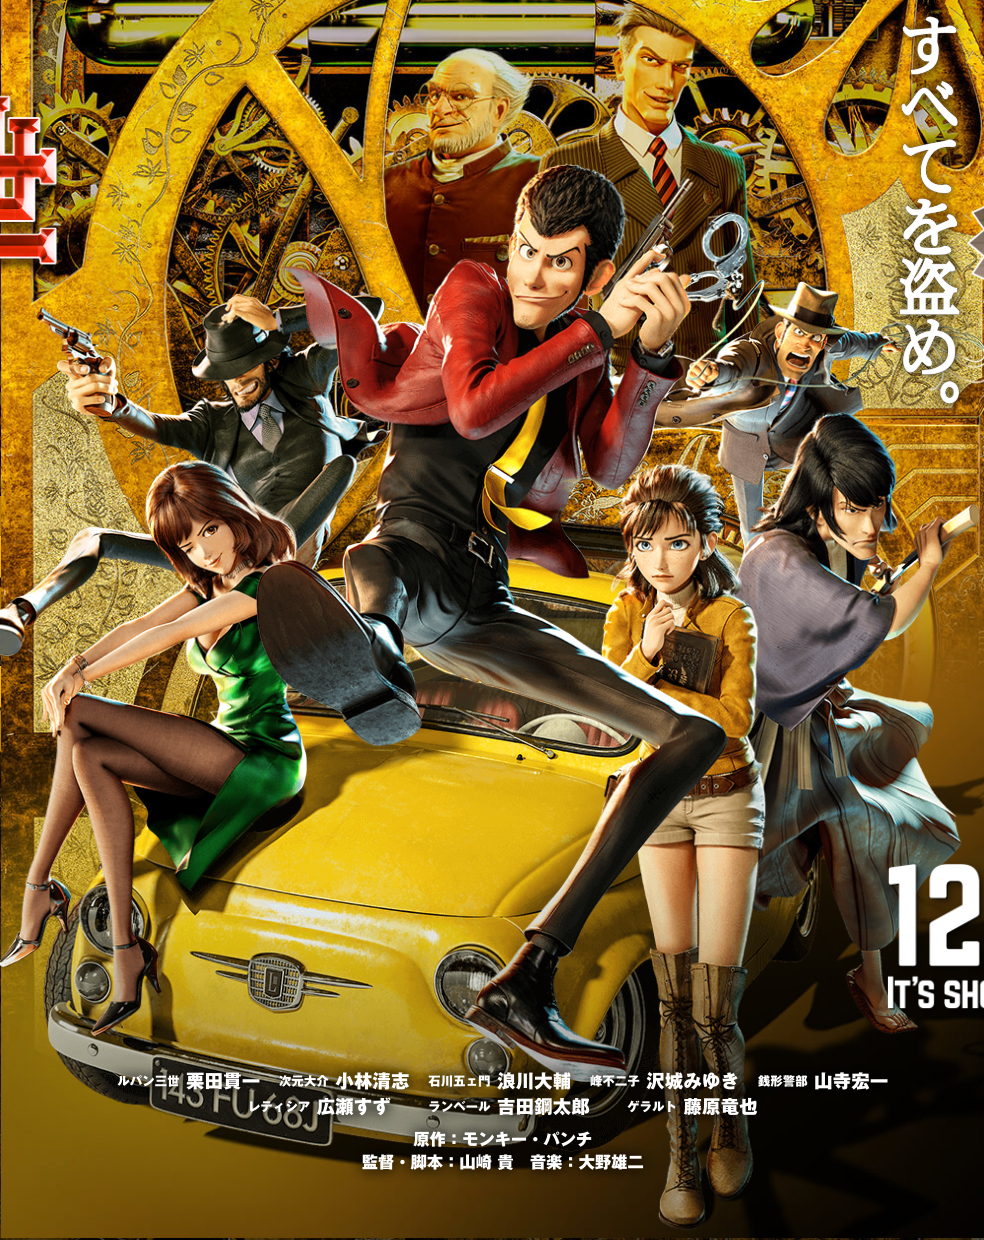 https://adala-news.fr/wp-content/uploads/2019/10/Lupin-III-The-First-anime-image.jpg